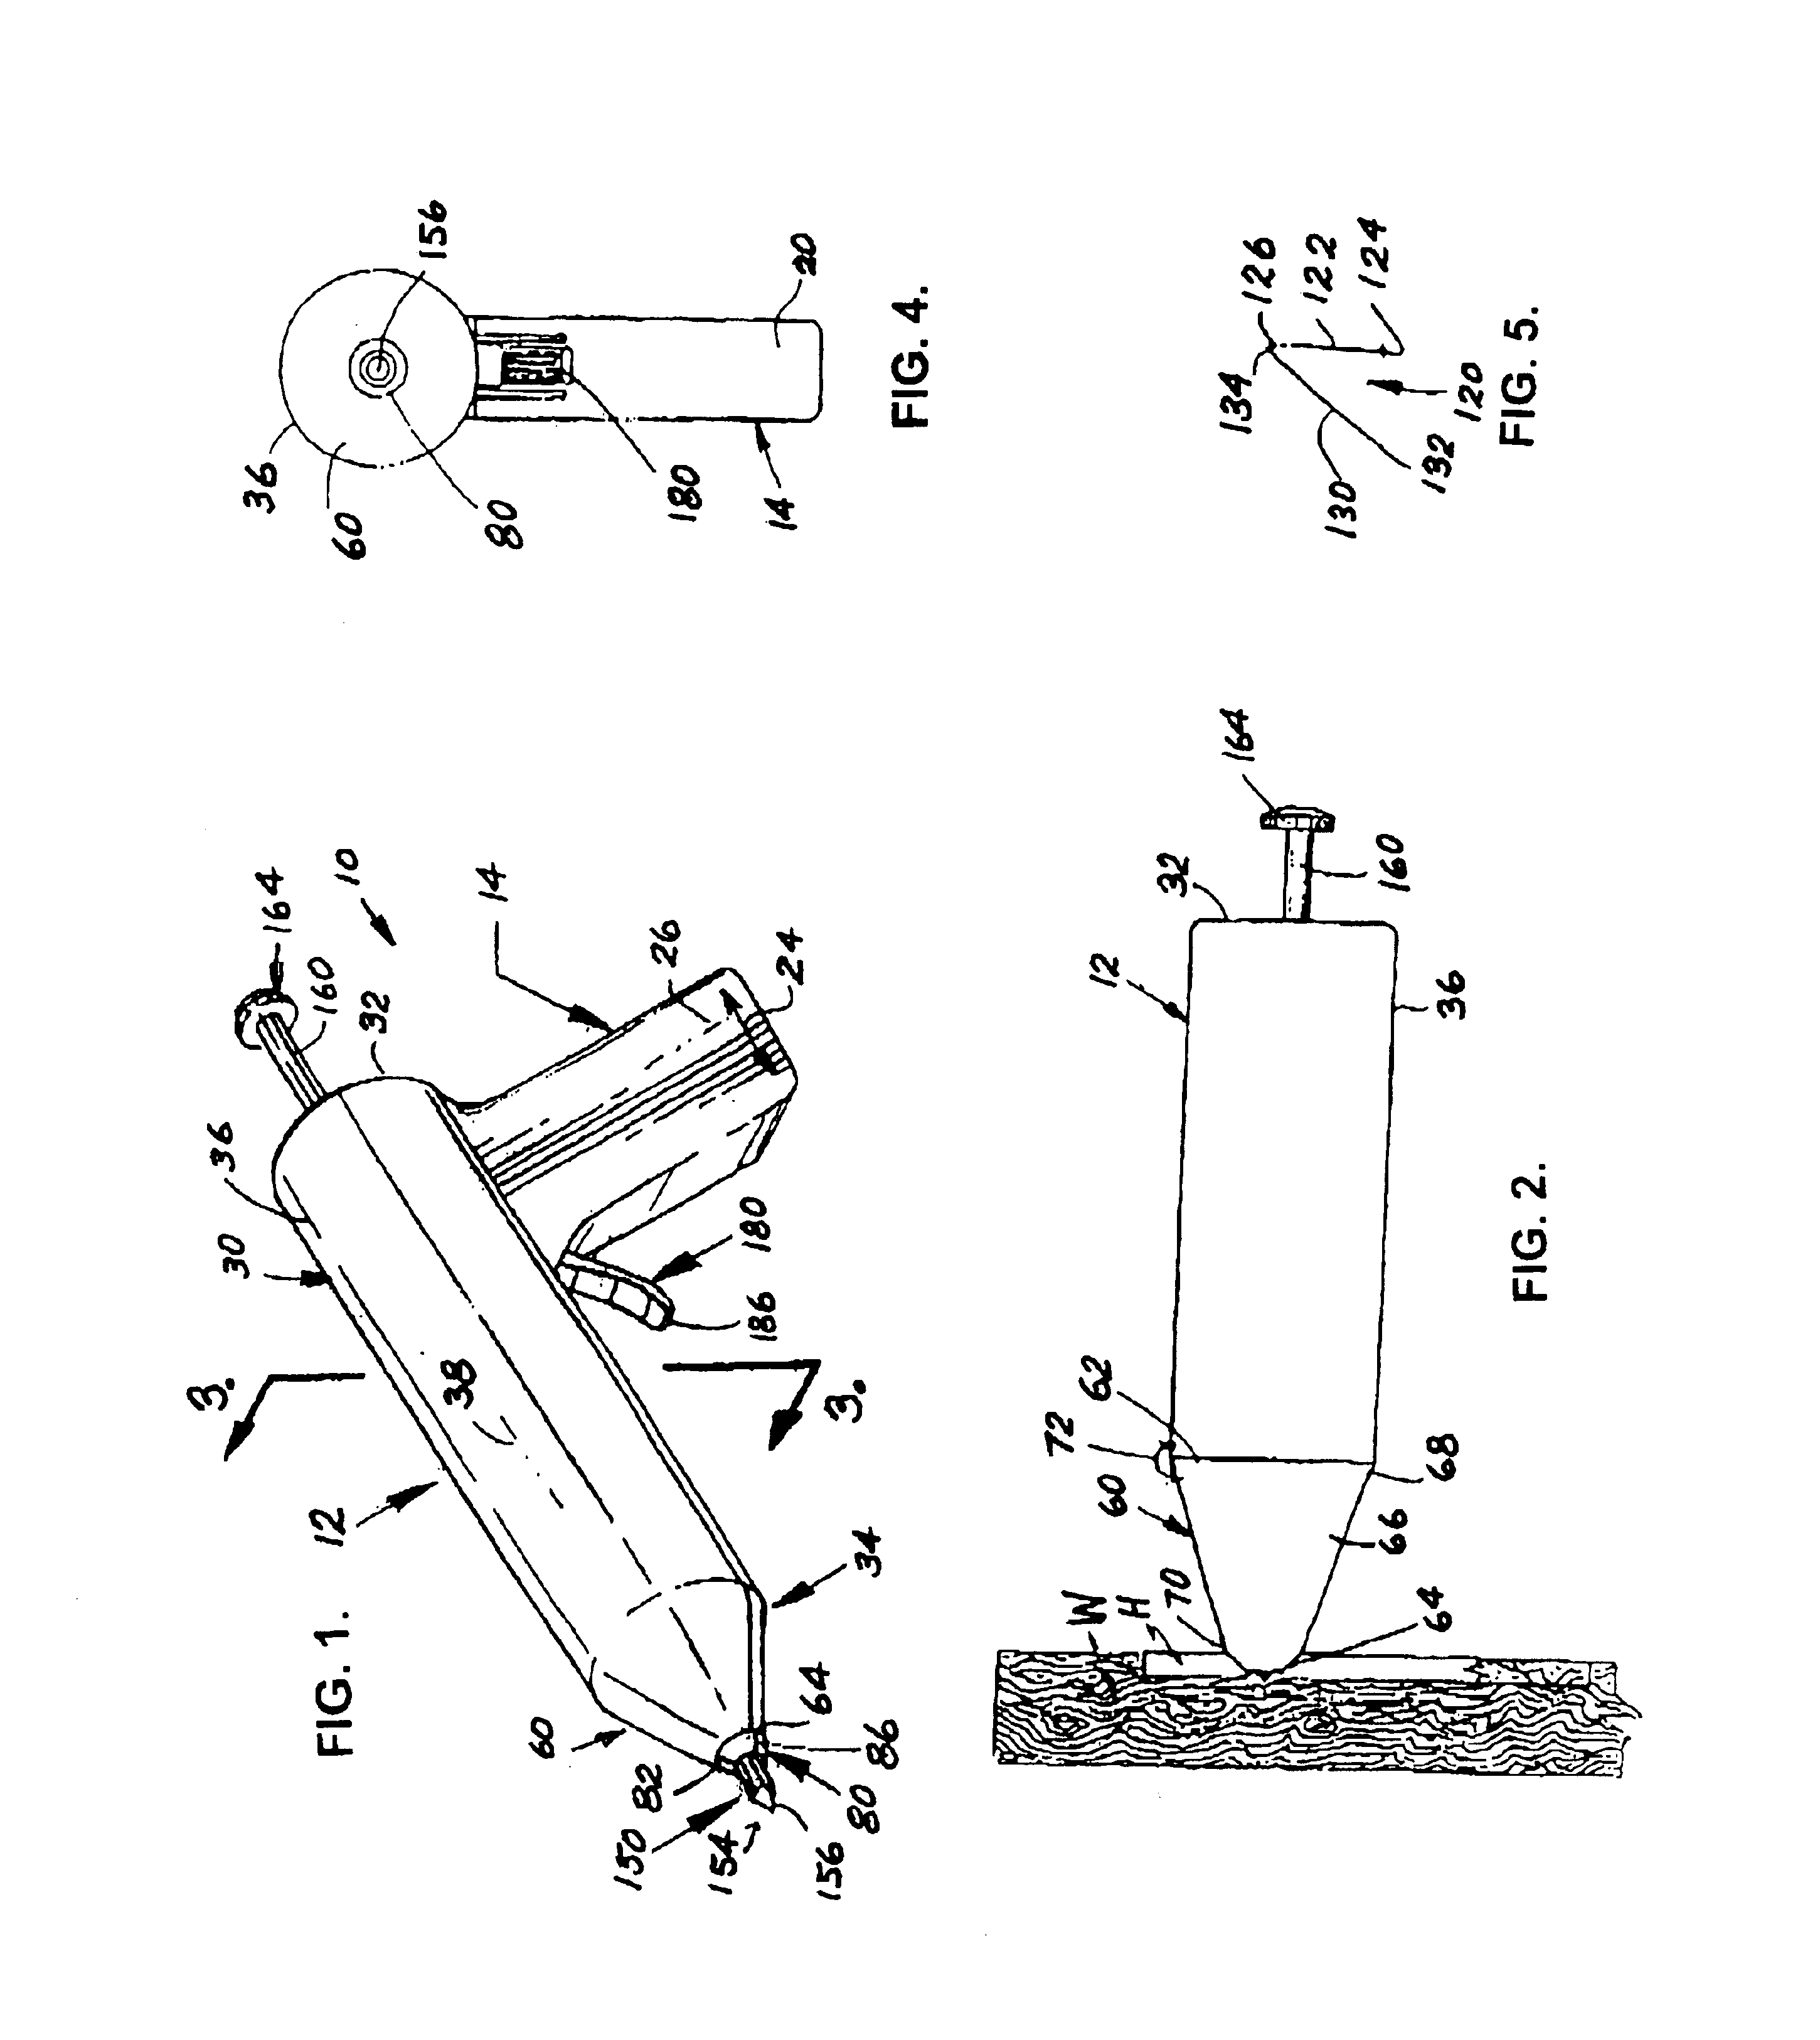 Hand tool for defining a starting location for an element to be driven into a substrate